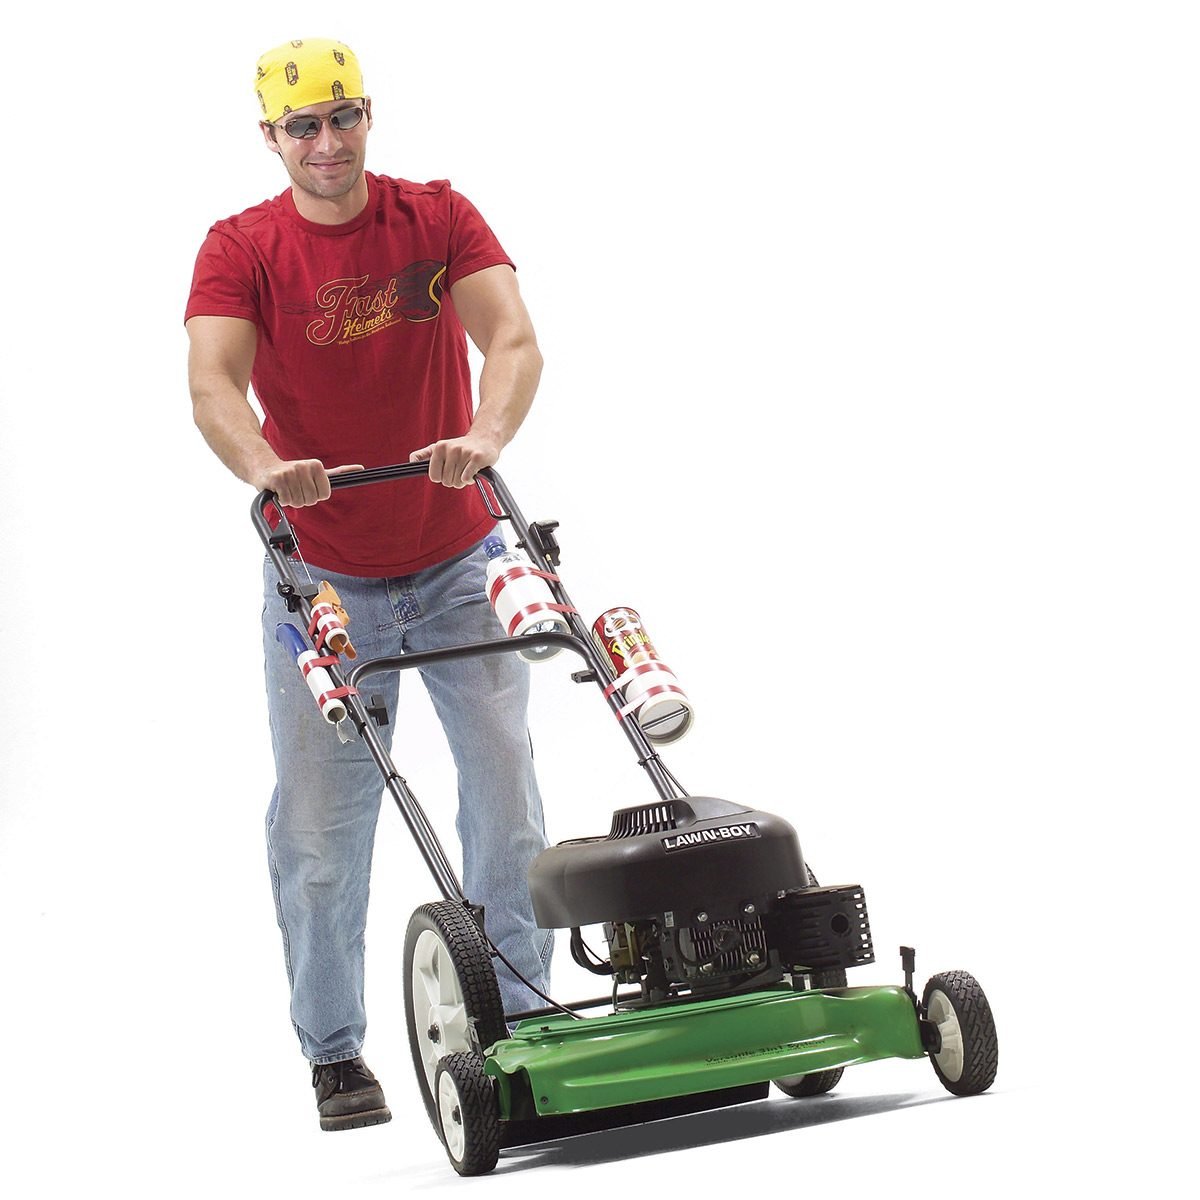 Accessorize Your Mower